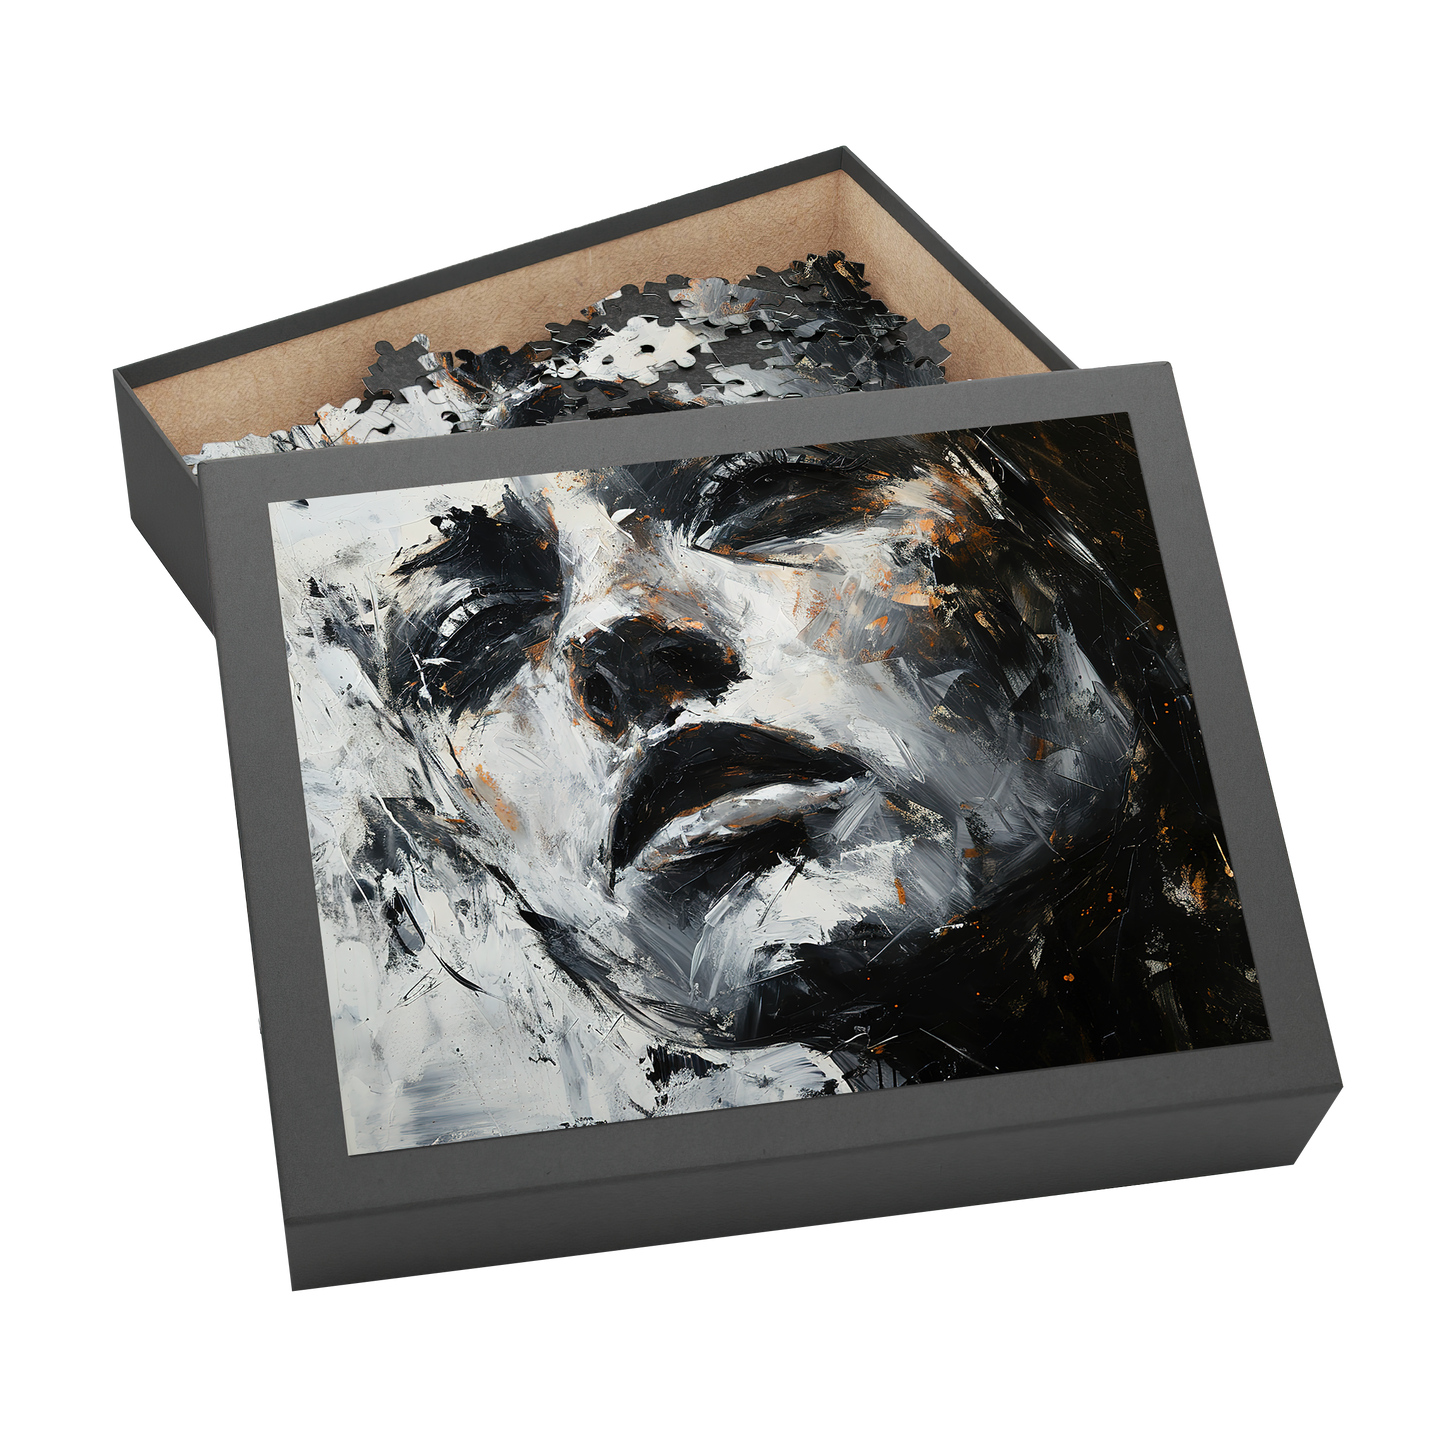 Judgement - Premium Jigsaw Puzzle - Black and White, Abstract Profile, Modern Art, Decore - Multiple Sizes Available